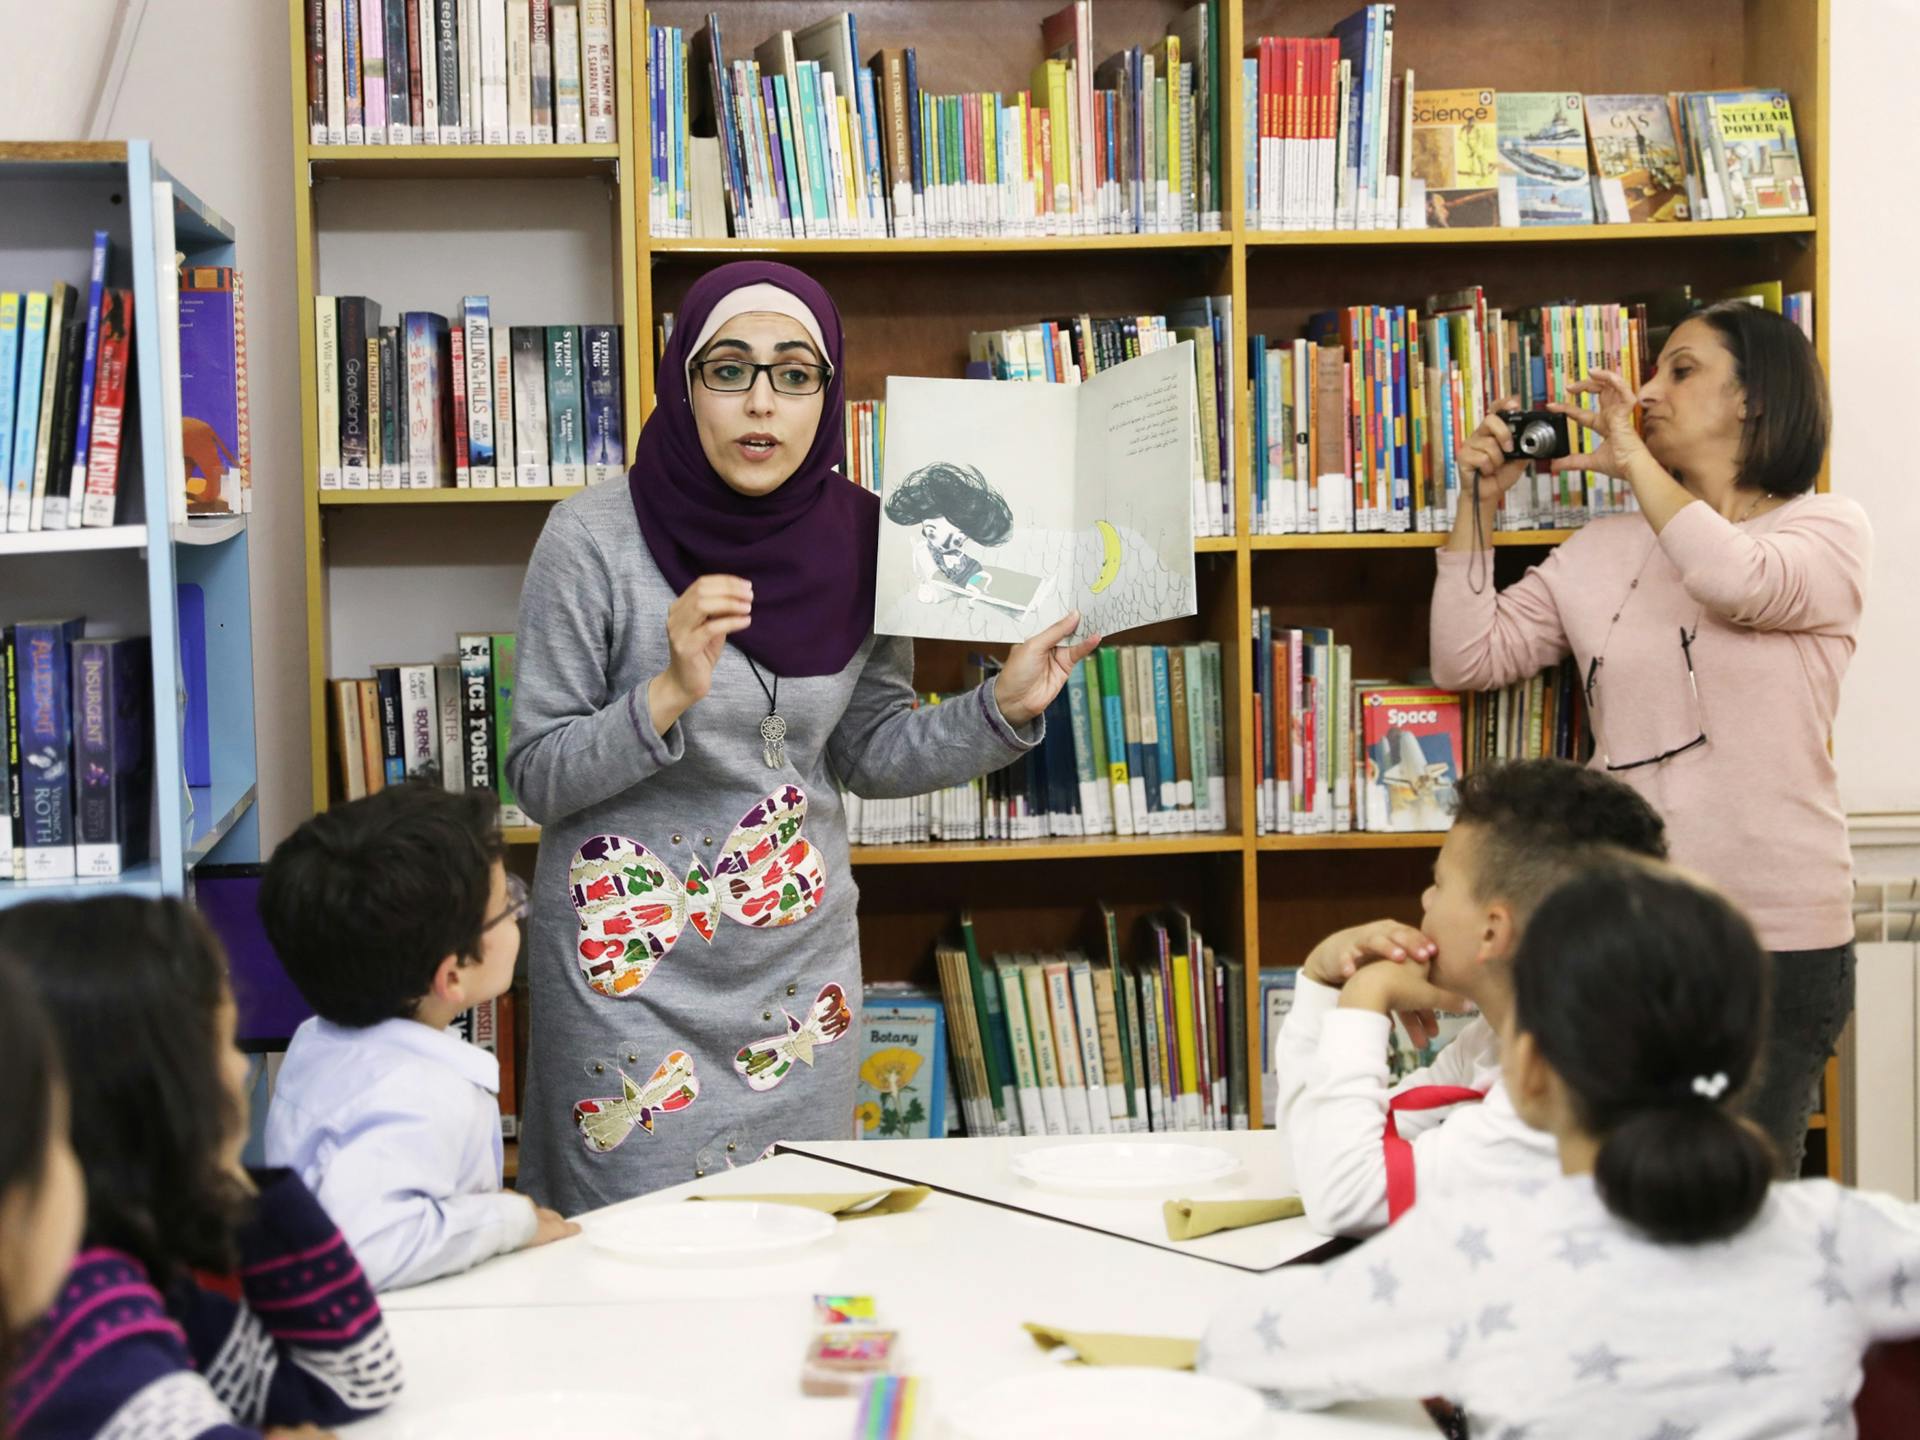 A teacher reading a childrens book to a group of children in a library